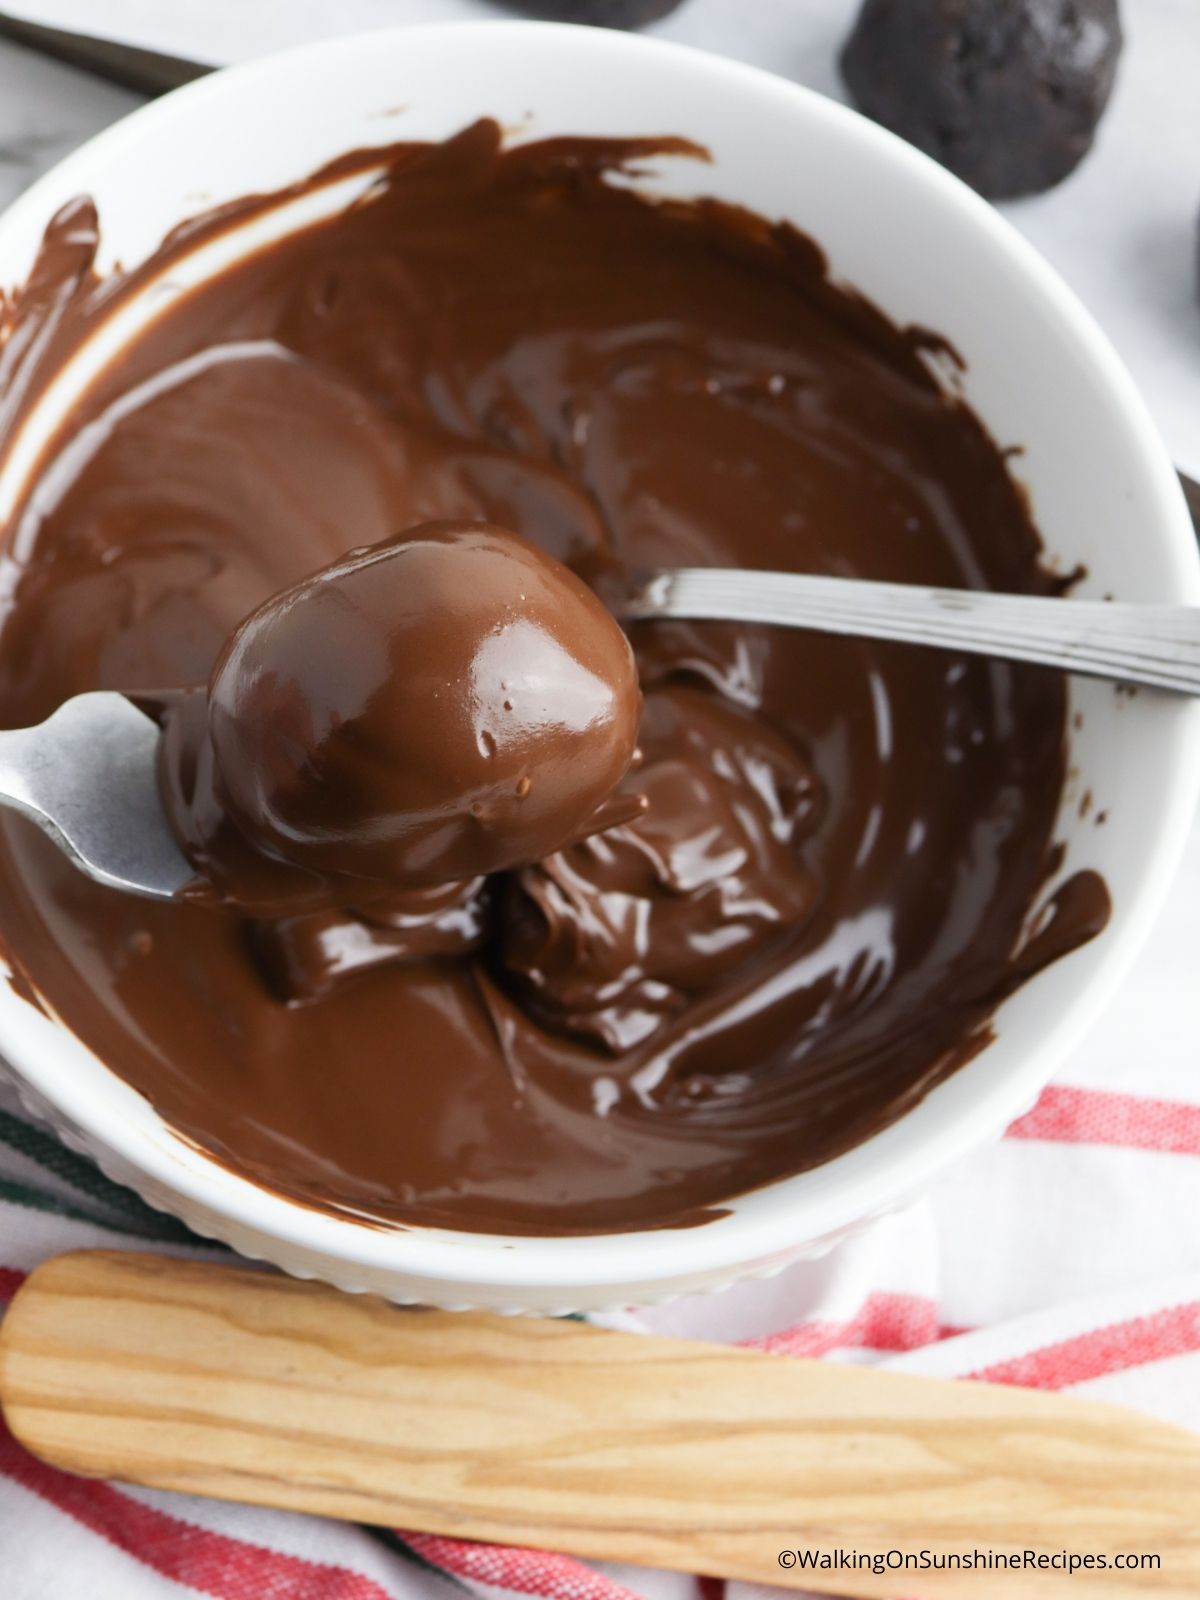 Dip in melted chocolate.